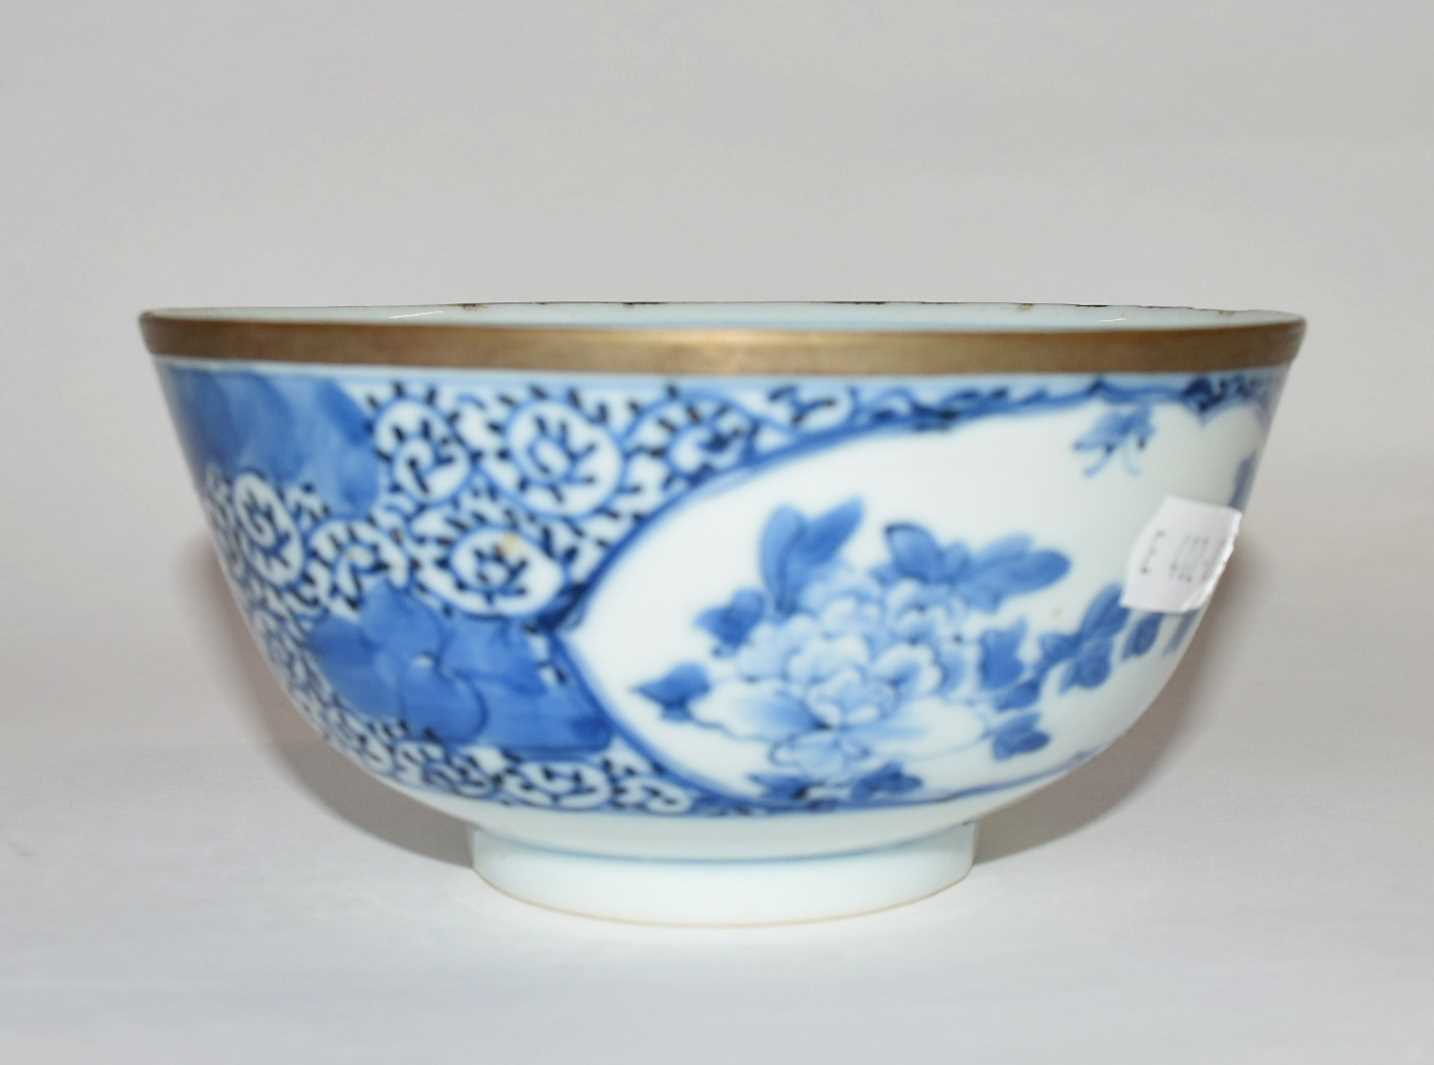 A Chinese porcelain bowl, 19th Century with blue and white floral design, four character mark to